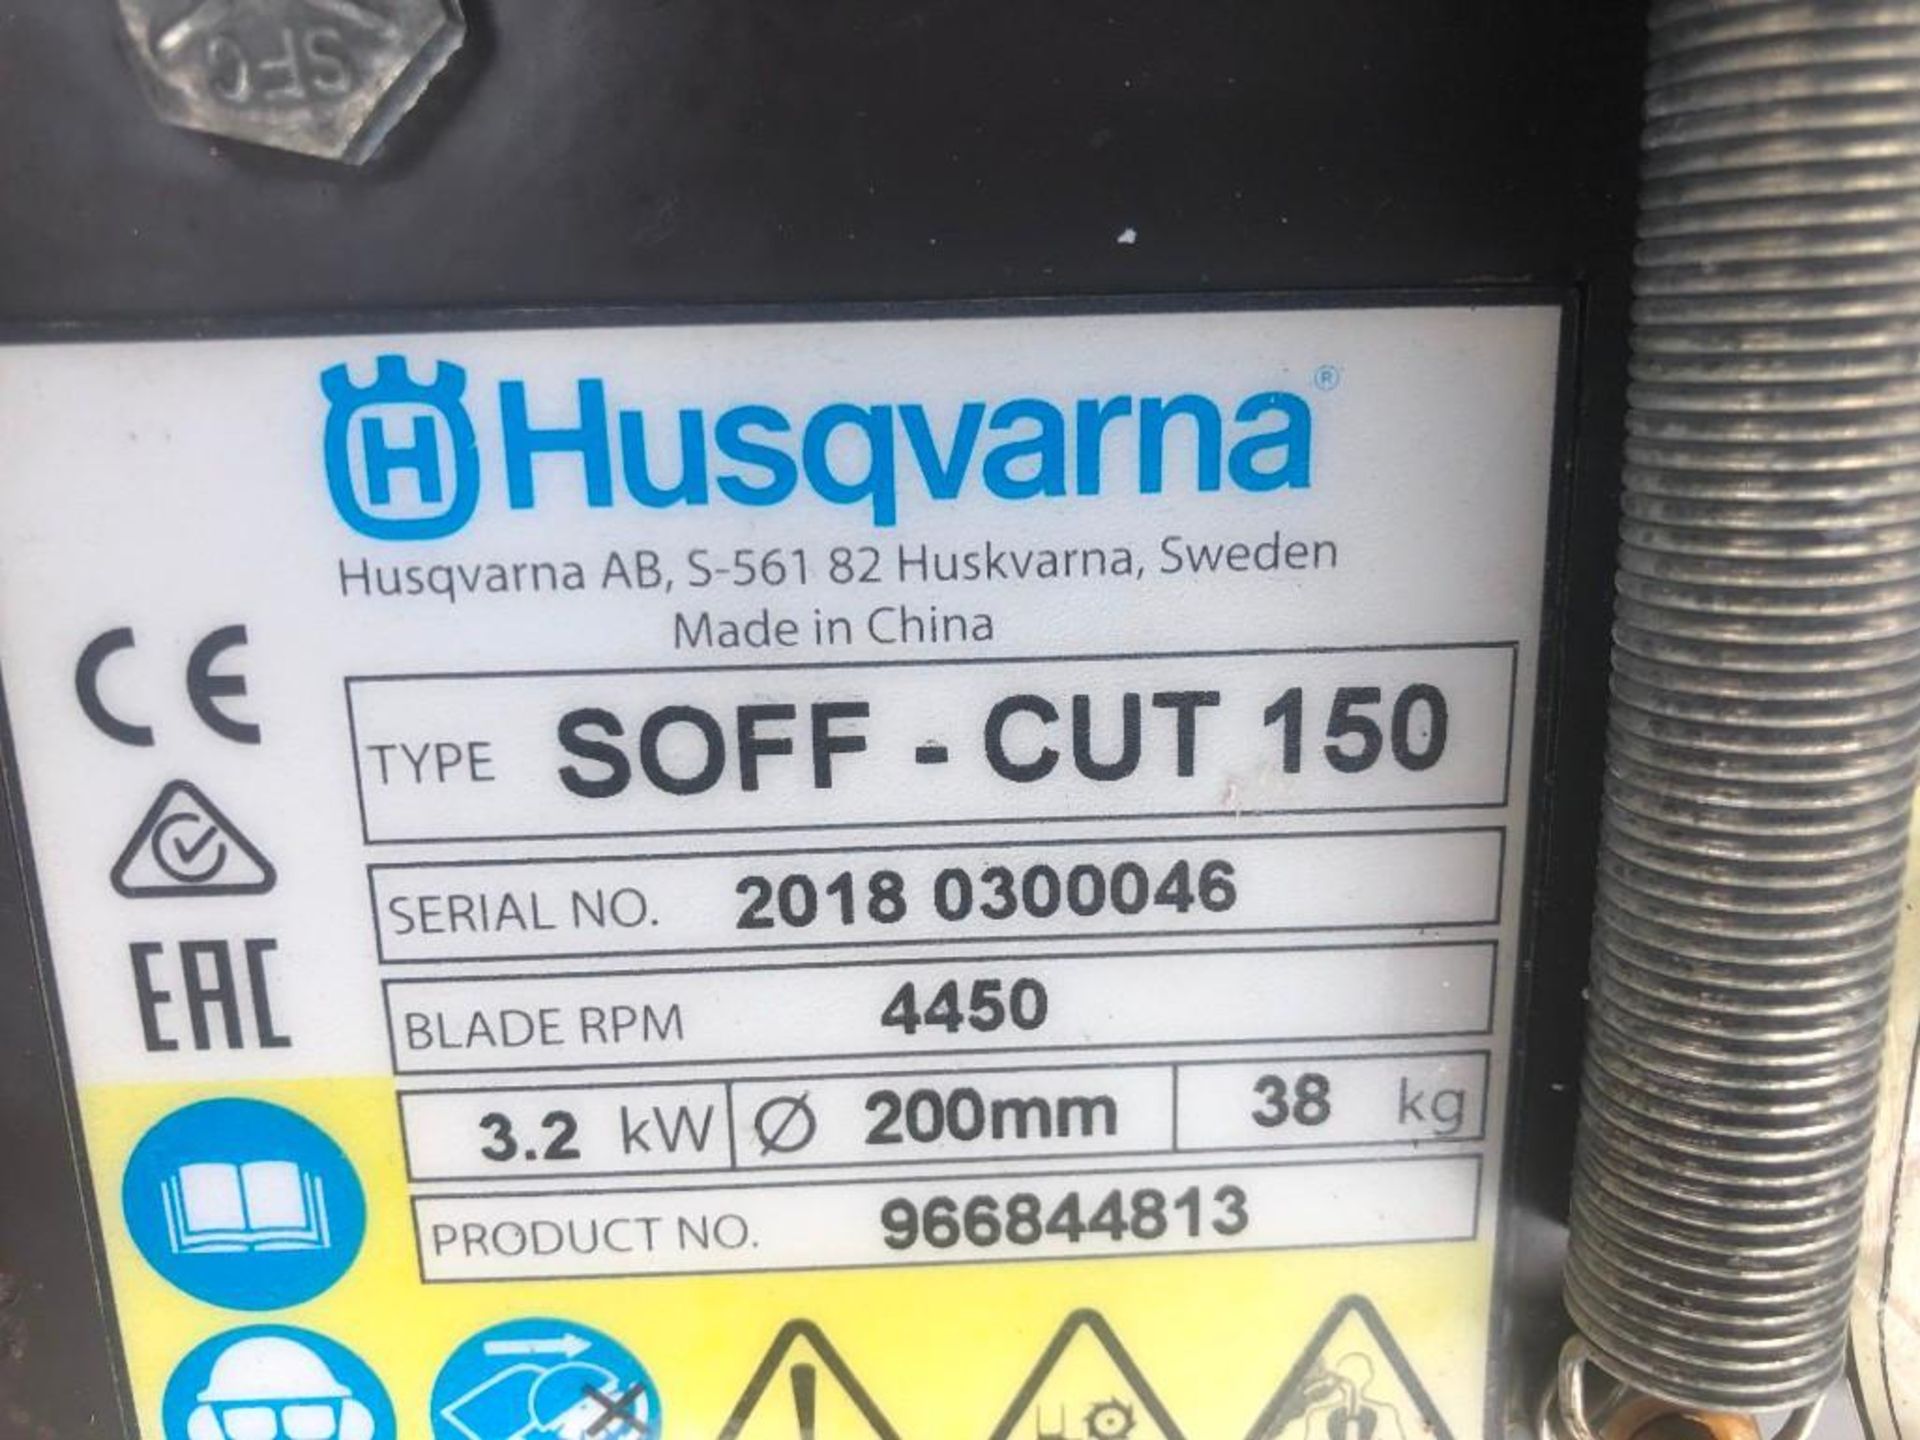 Husqvarna Soff-Cut 150 Concrete Saw, Serial #20180300046, Model Soff-Cut 150. Located at 301 E Henry - Image 5 of 5